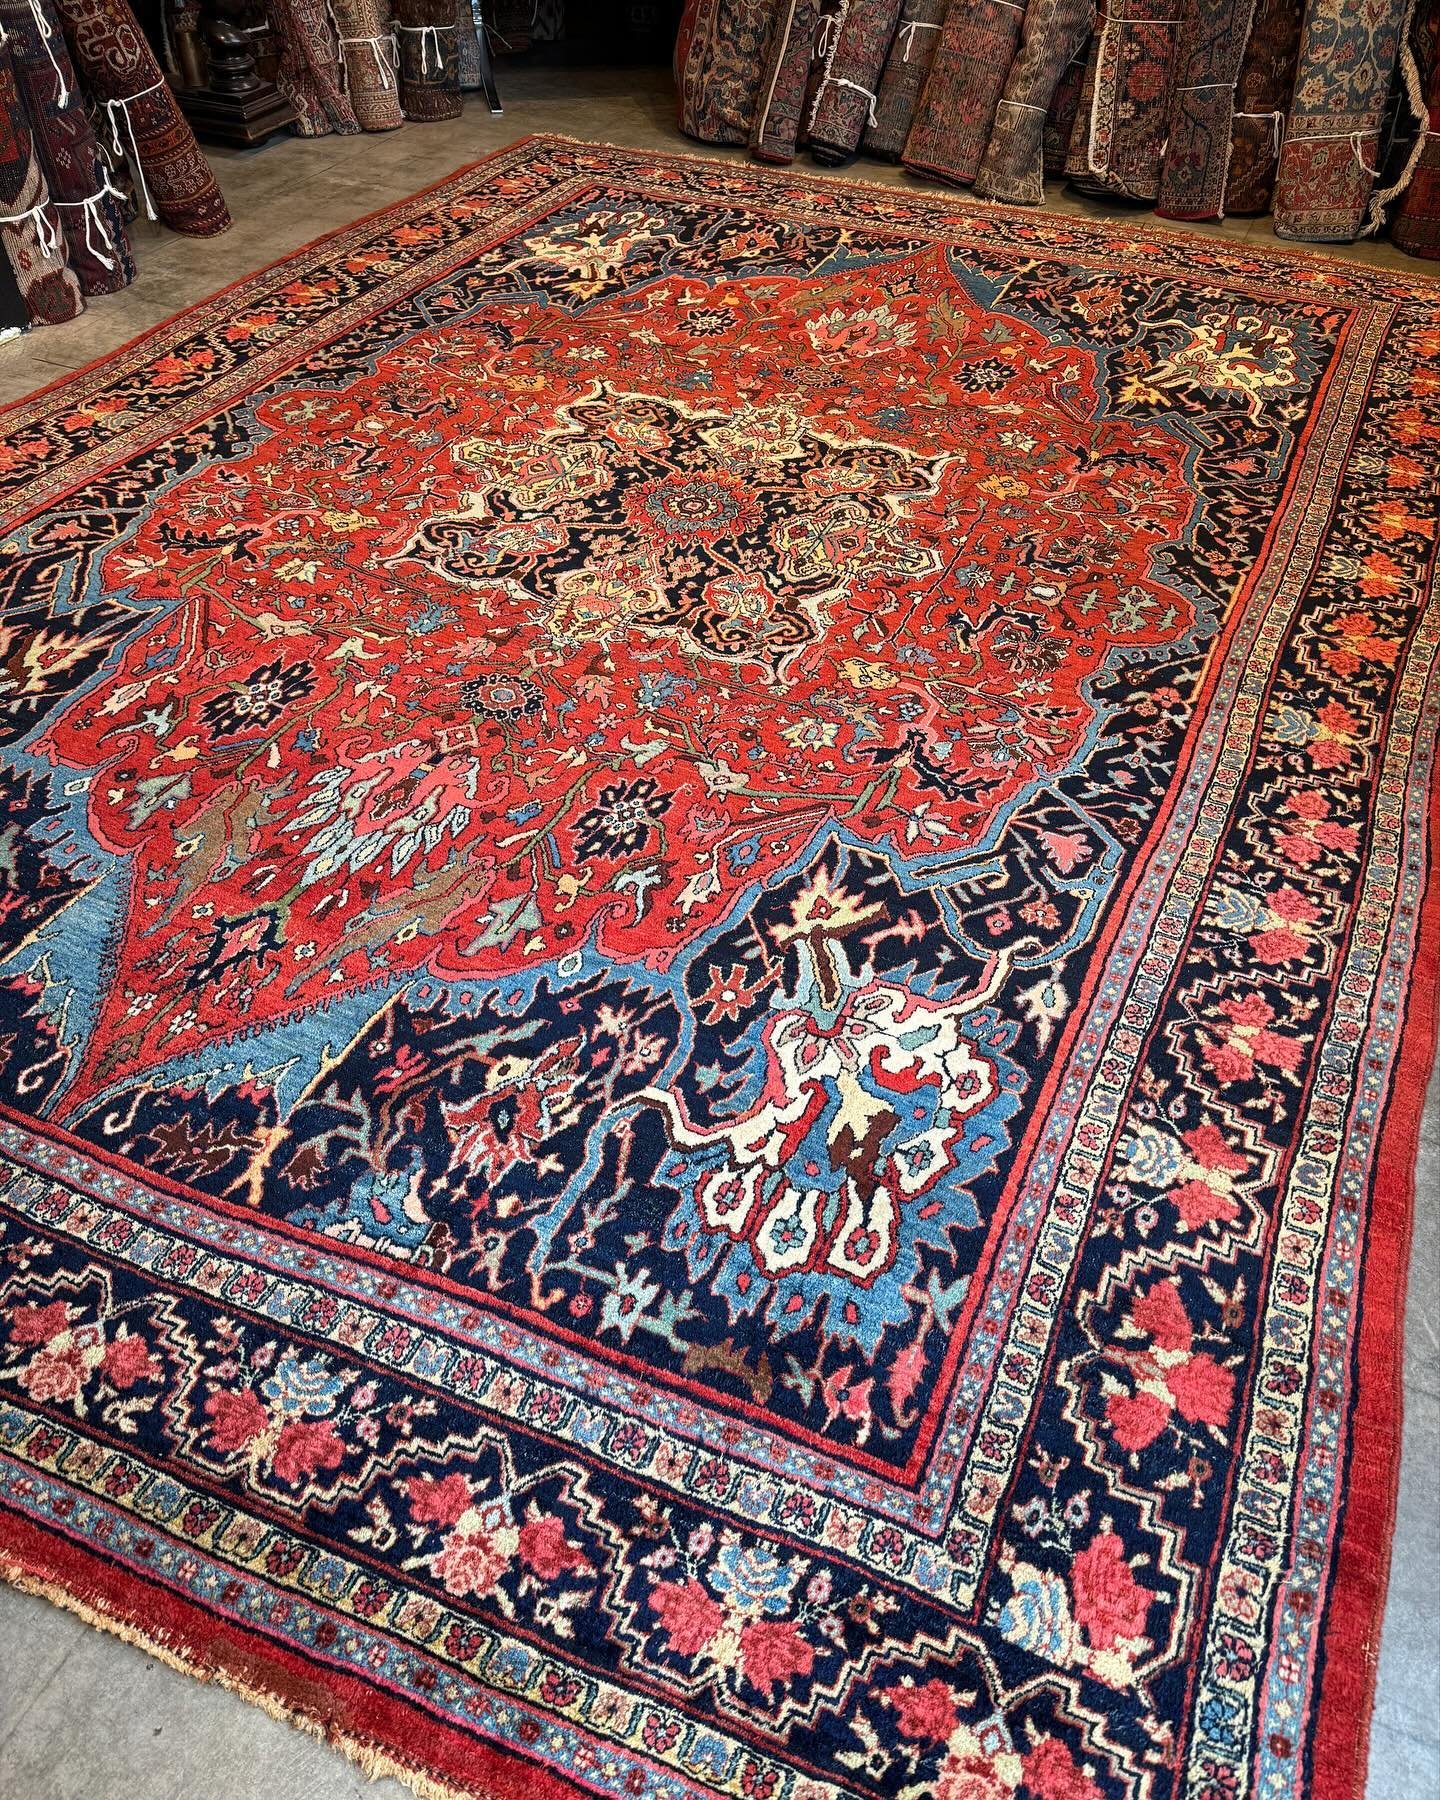 First images of a top notch antique Bidjar we received today. A phenomenal work of art in near perfect condition. For the connoisseur Bidjar lovers out there. This one will exceed the expectations of even the most discerning rug lovers. Yes, we are t